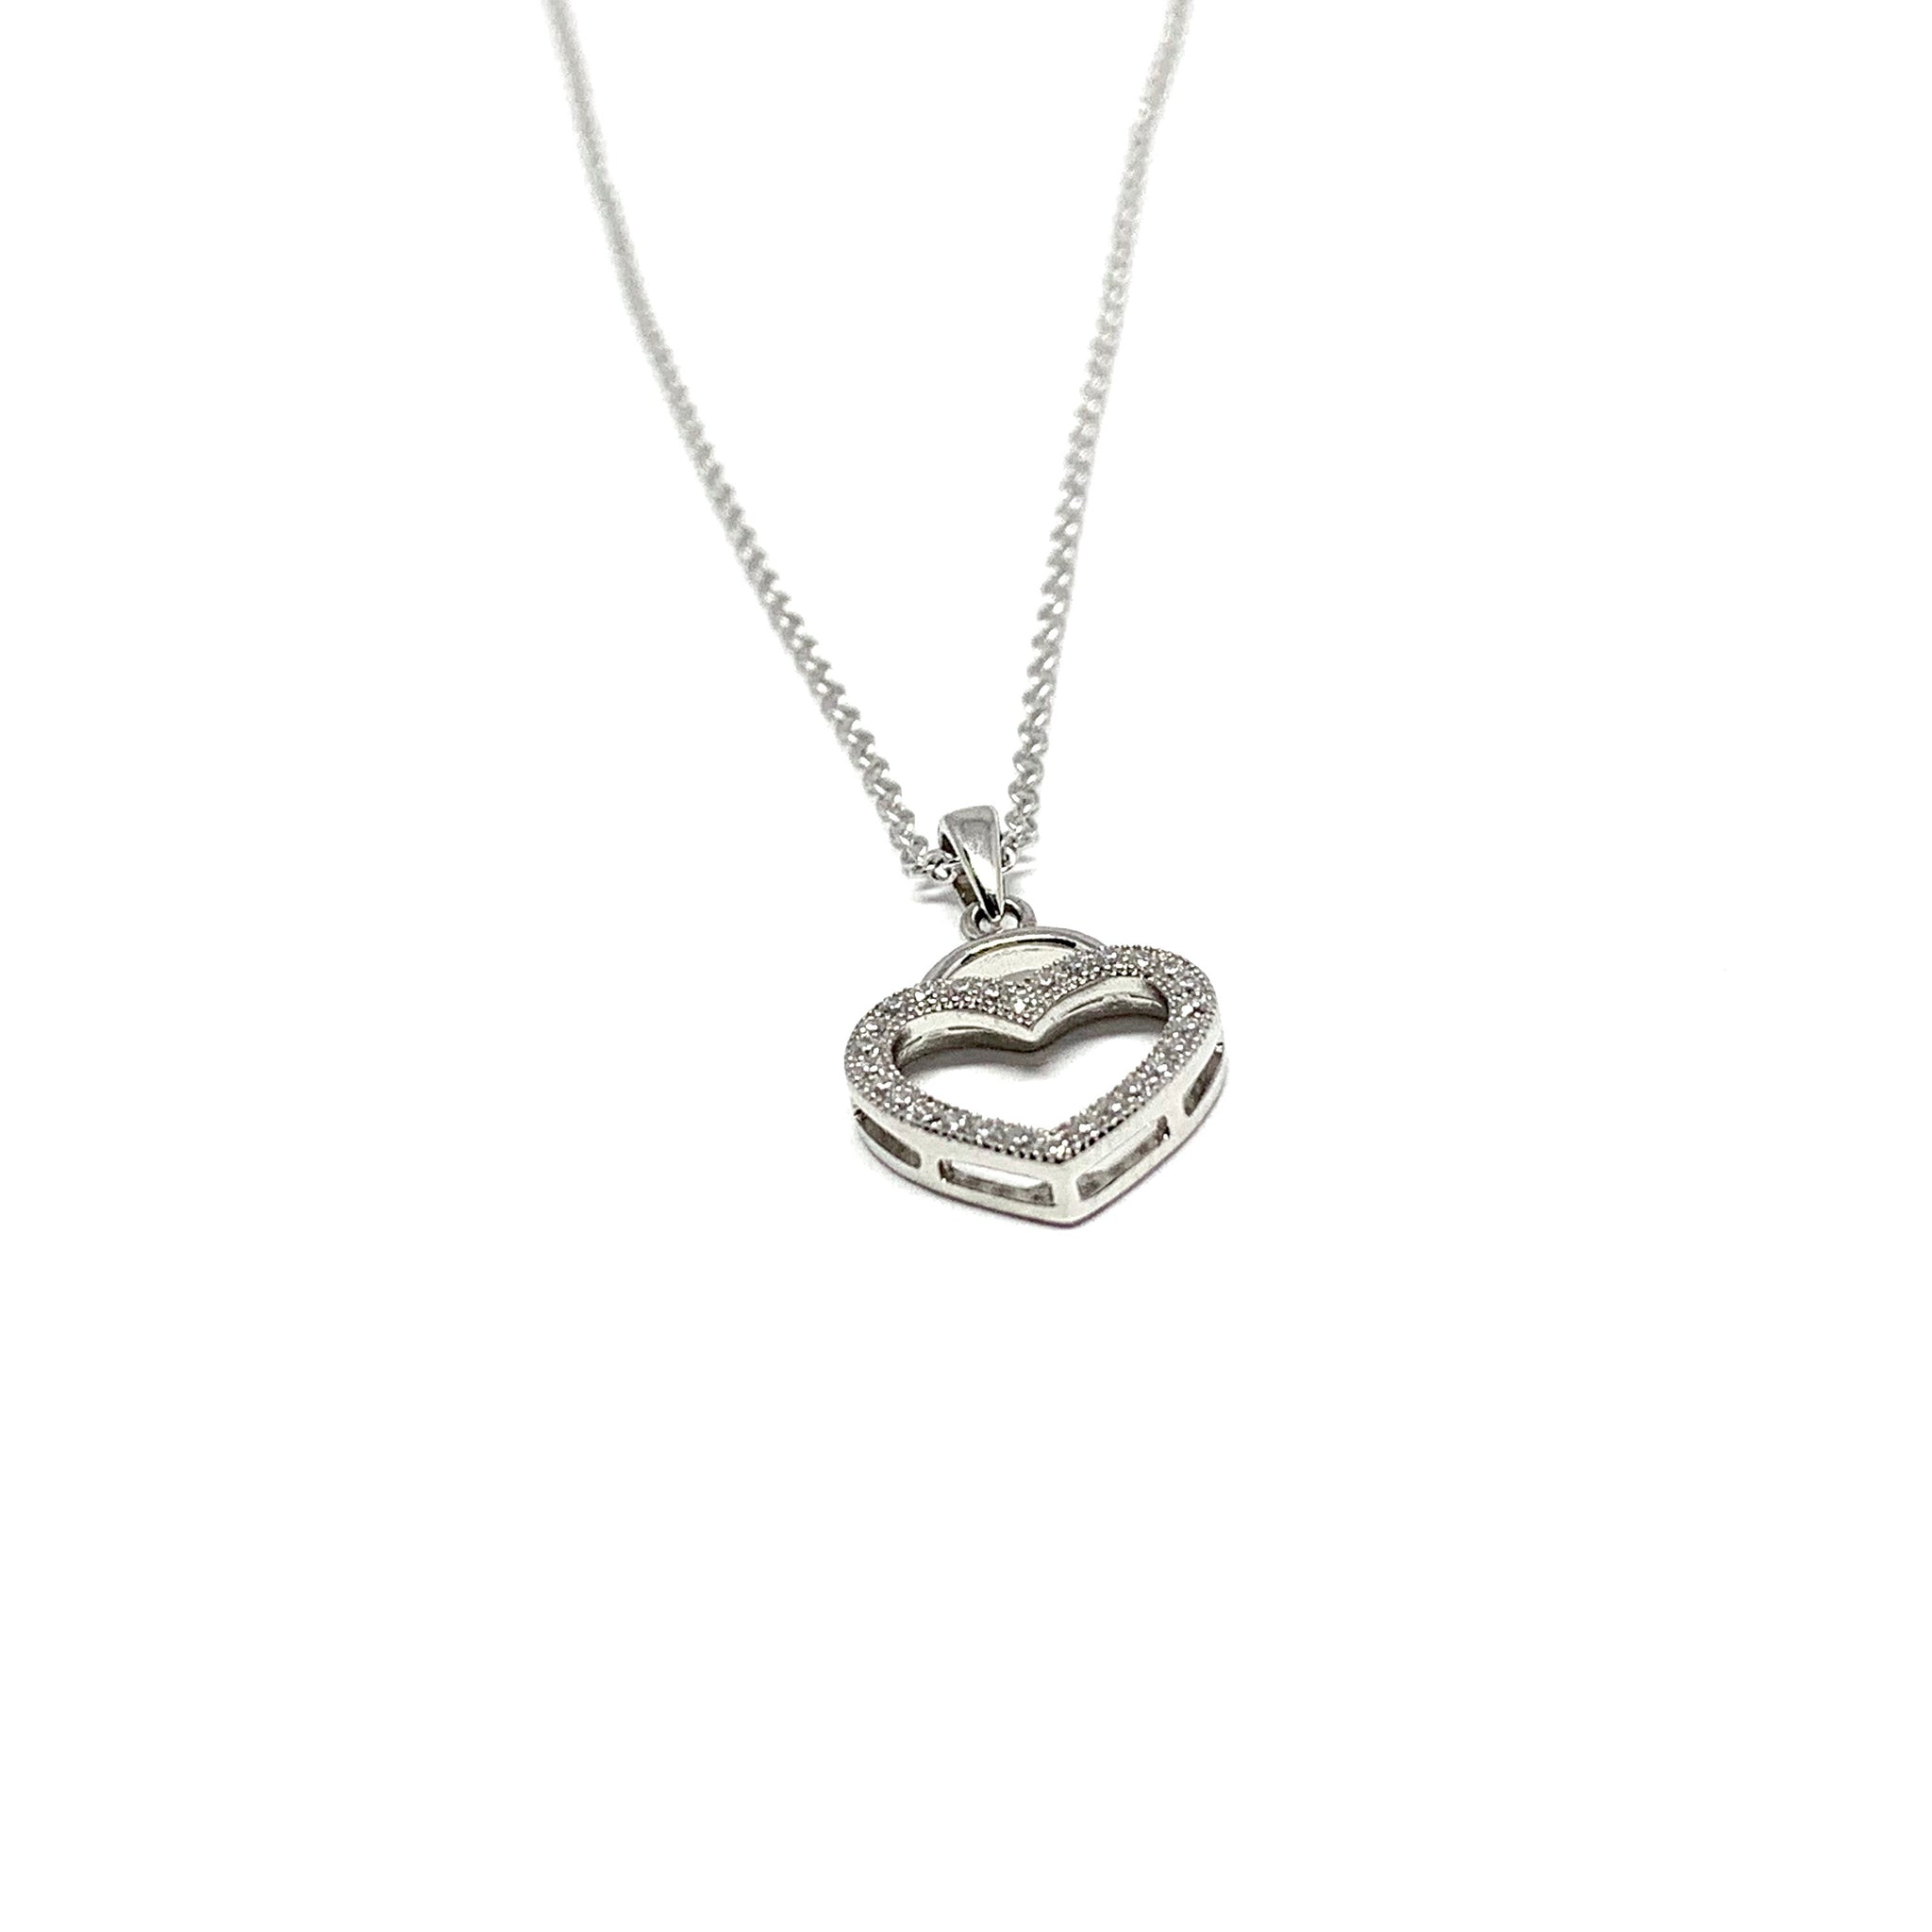 THE FOREVER HEART NECKLACE - Contagious Designs